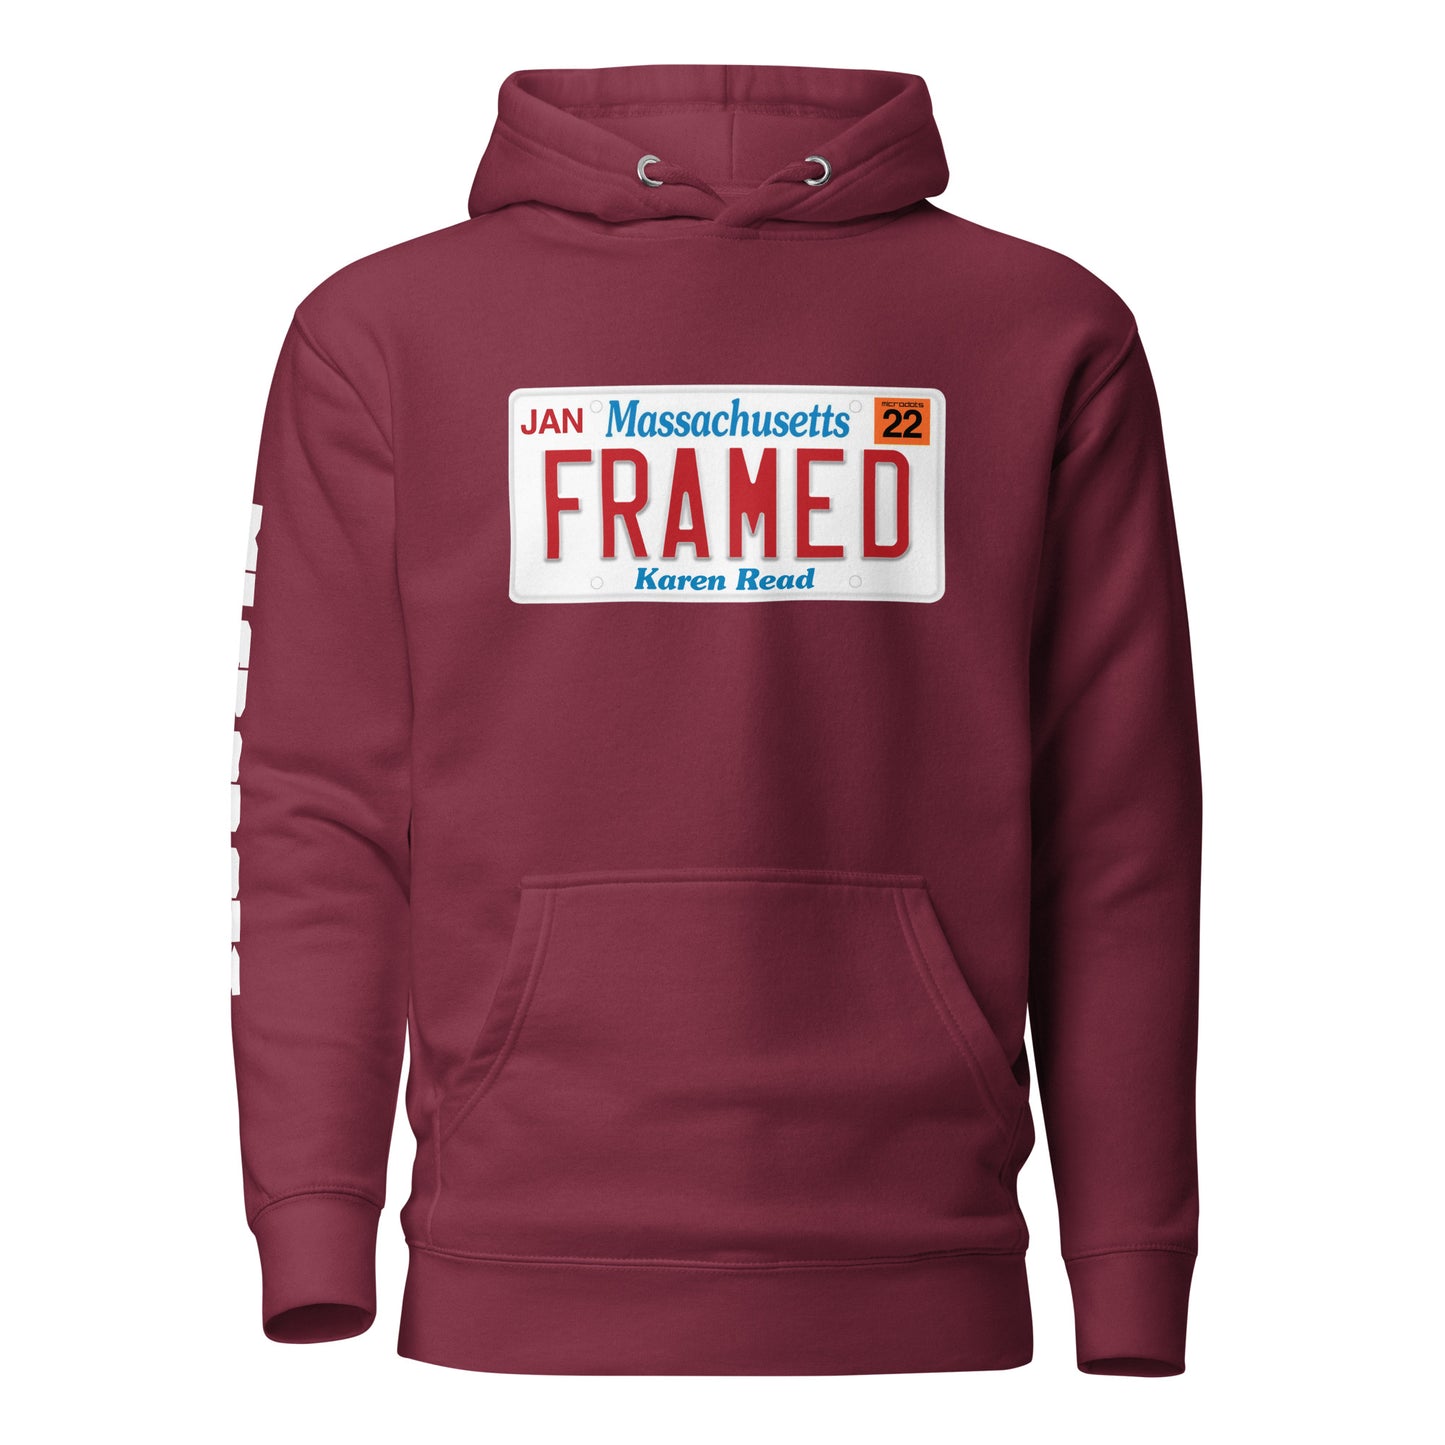 Official Microdots "FRAMED" Design Unisex Hoodie